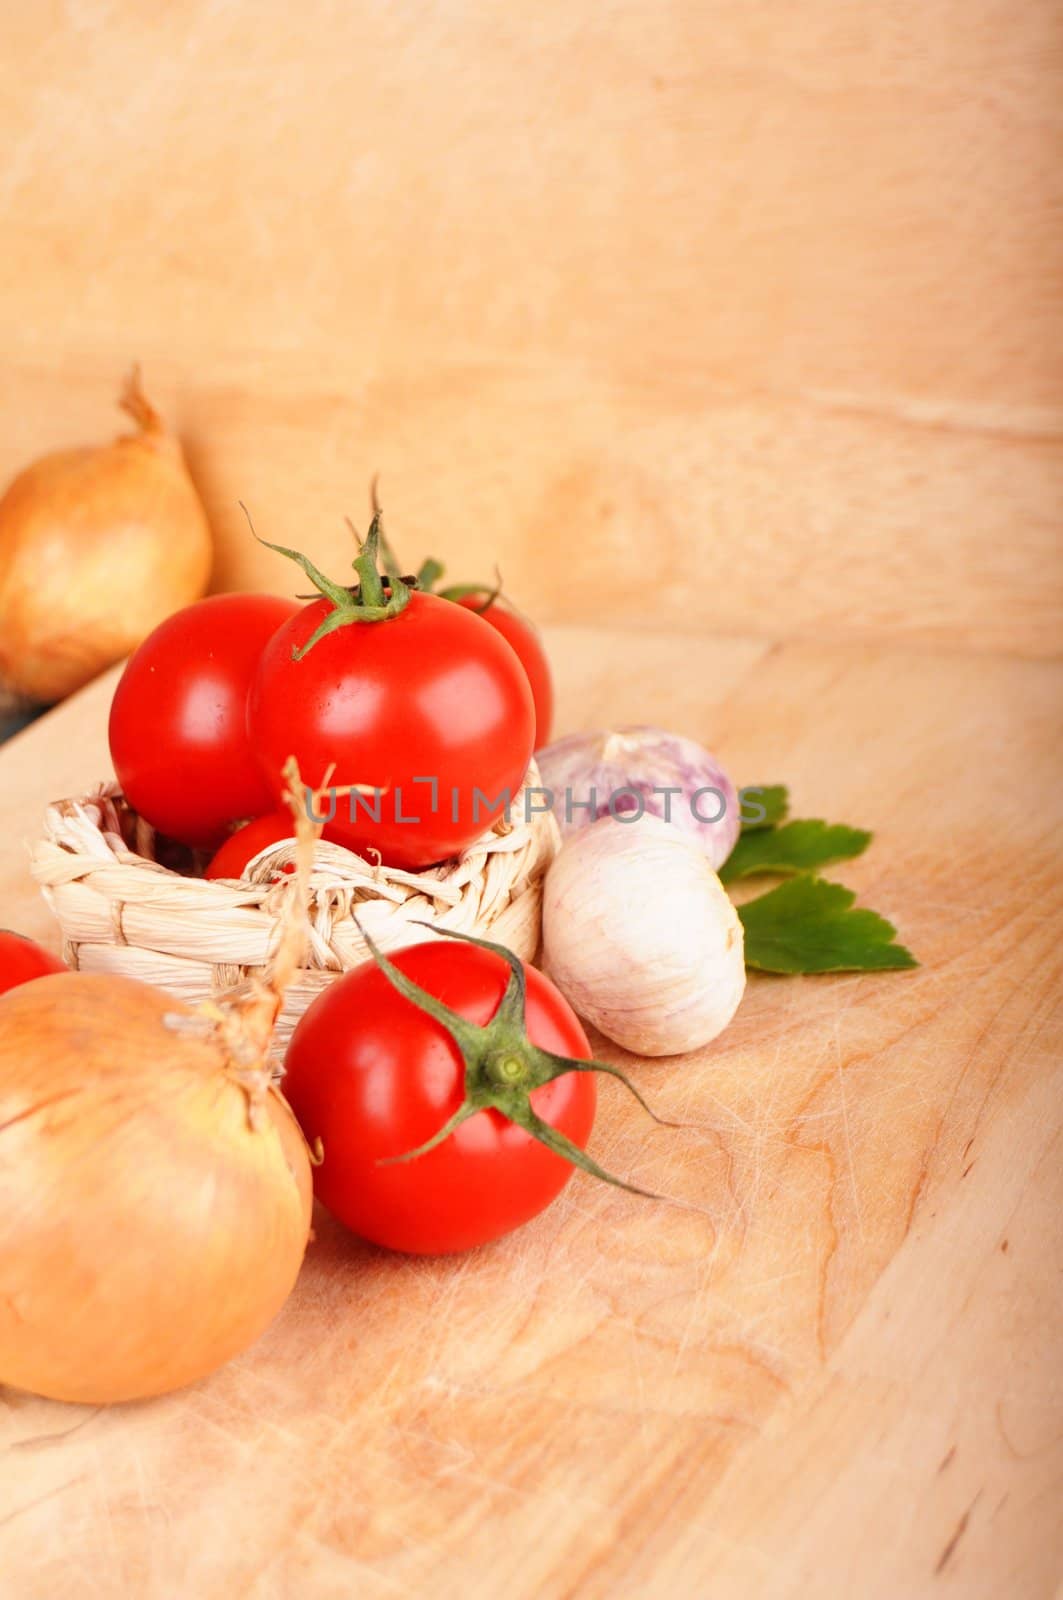 tomatoes vegetable and garlic with copyspace showing food concept